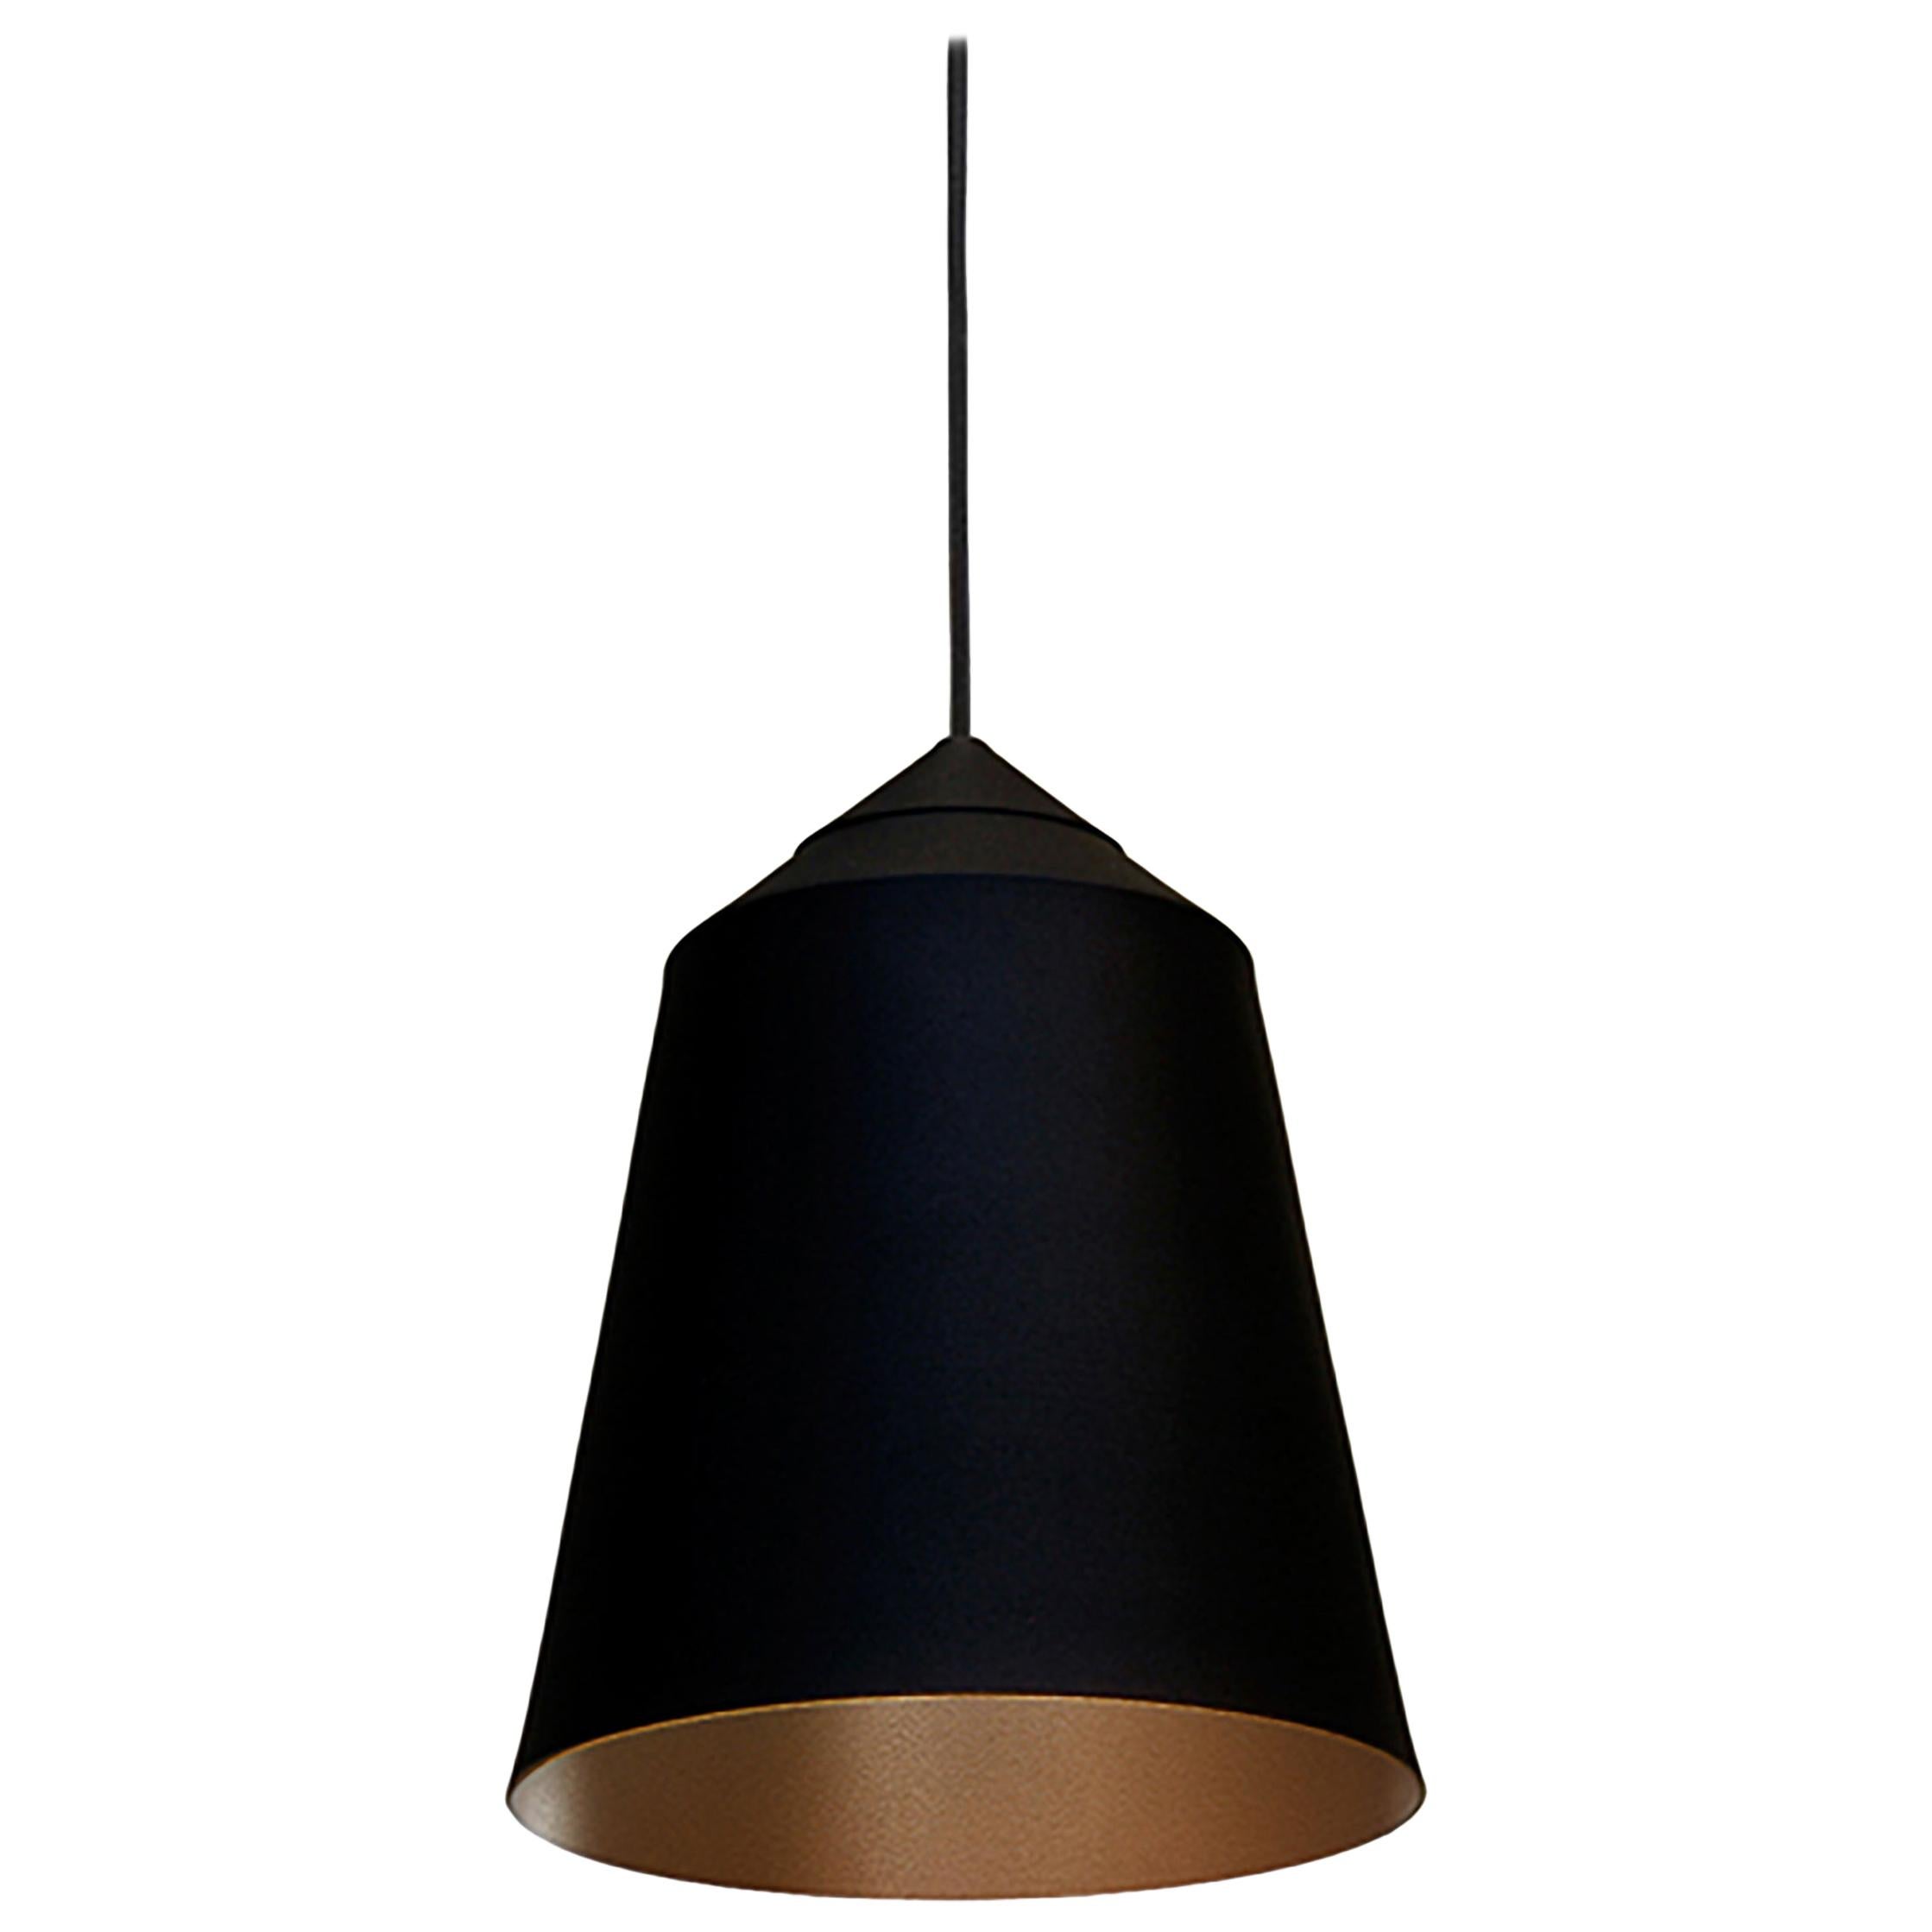 Circus Pendant Light Design By Corinna Warm For Warm Small Black/Bronze In Stock